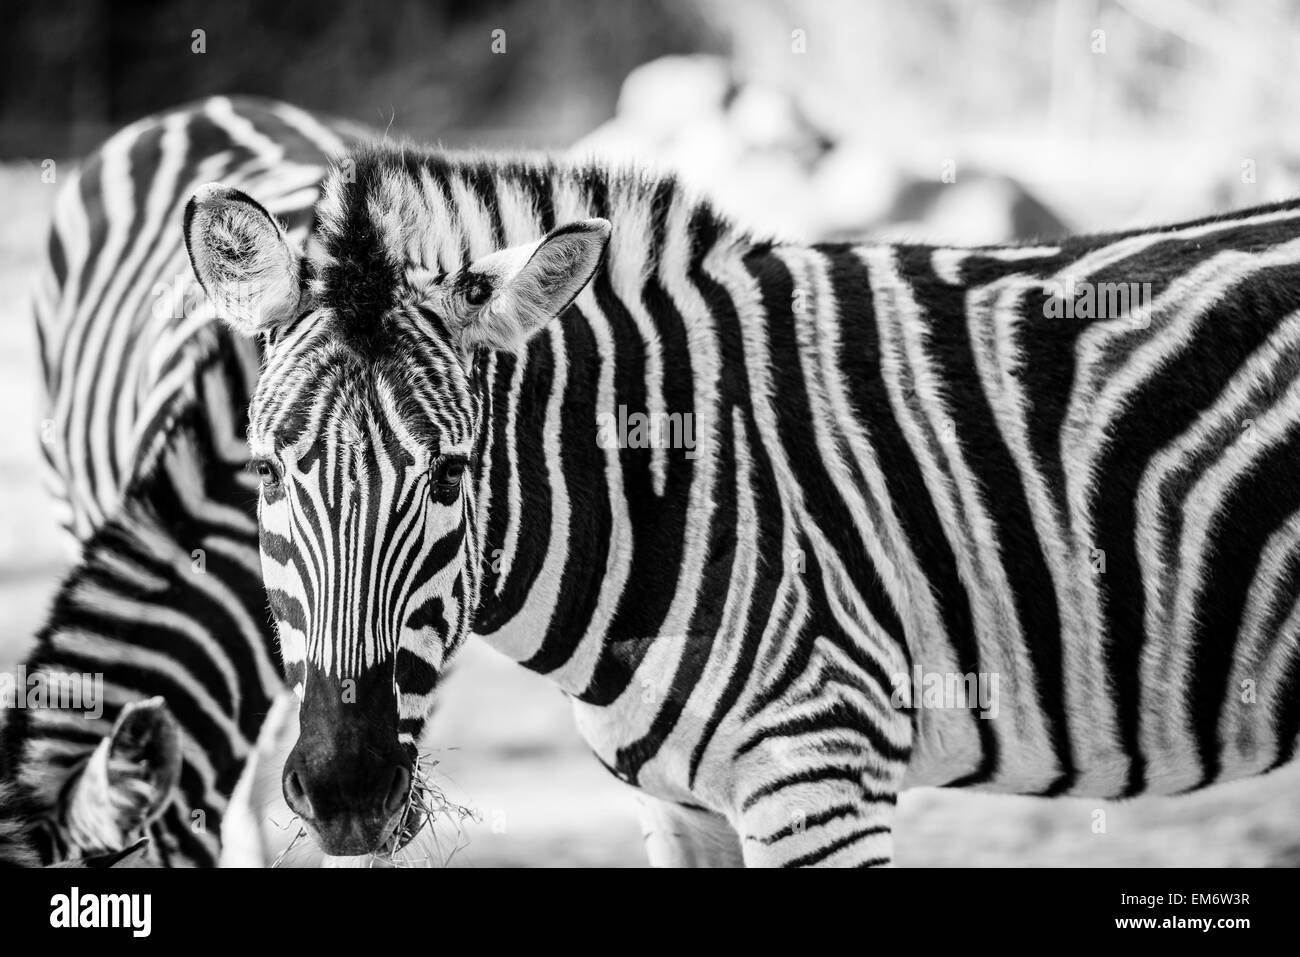 Zebra grazing in the wild field. Black and white stripes creates a prominent pattern with contrast in its coat.  Photographed in Stock Photo